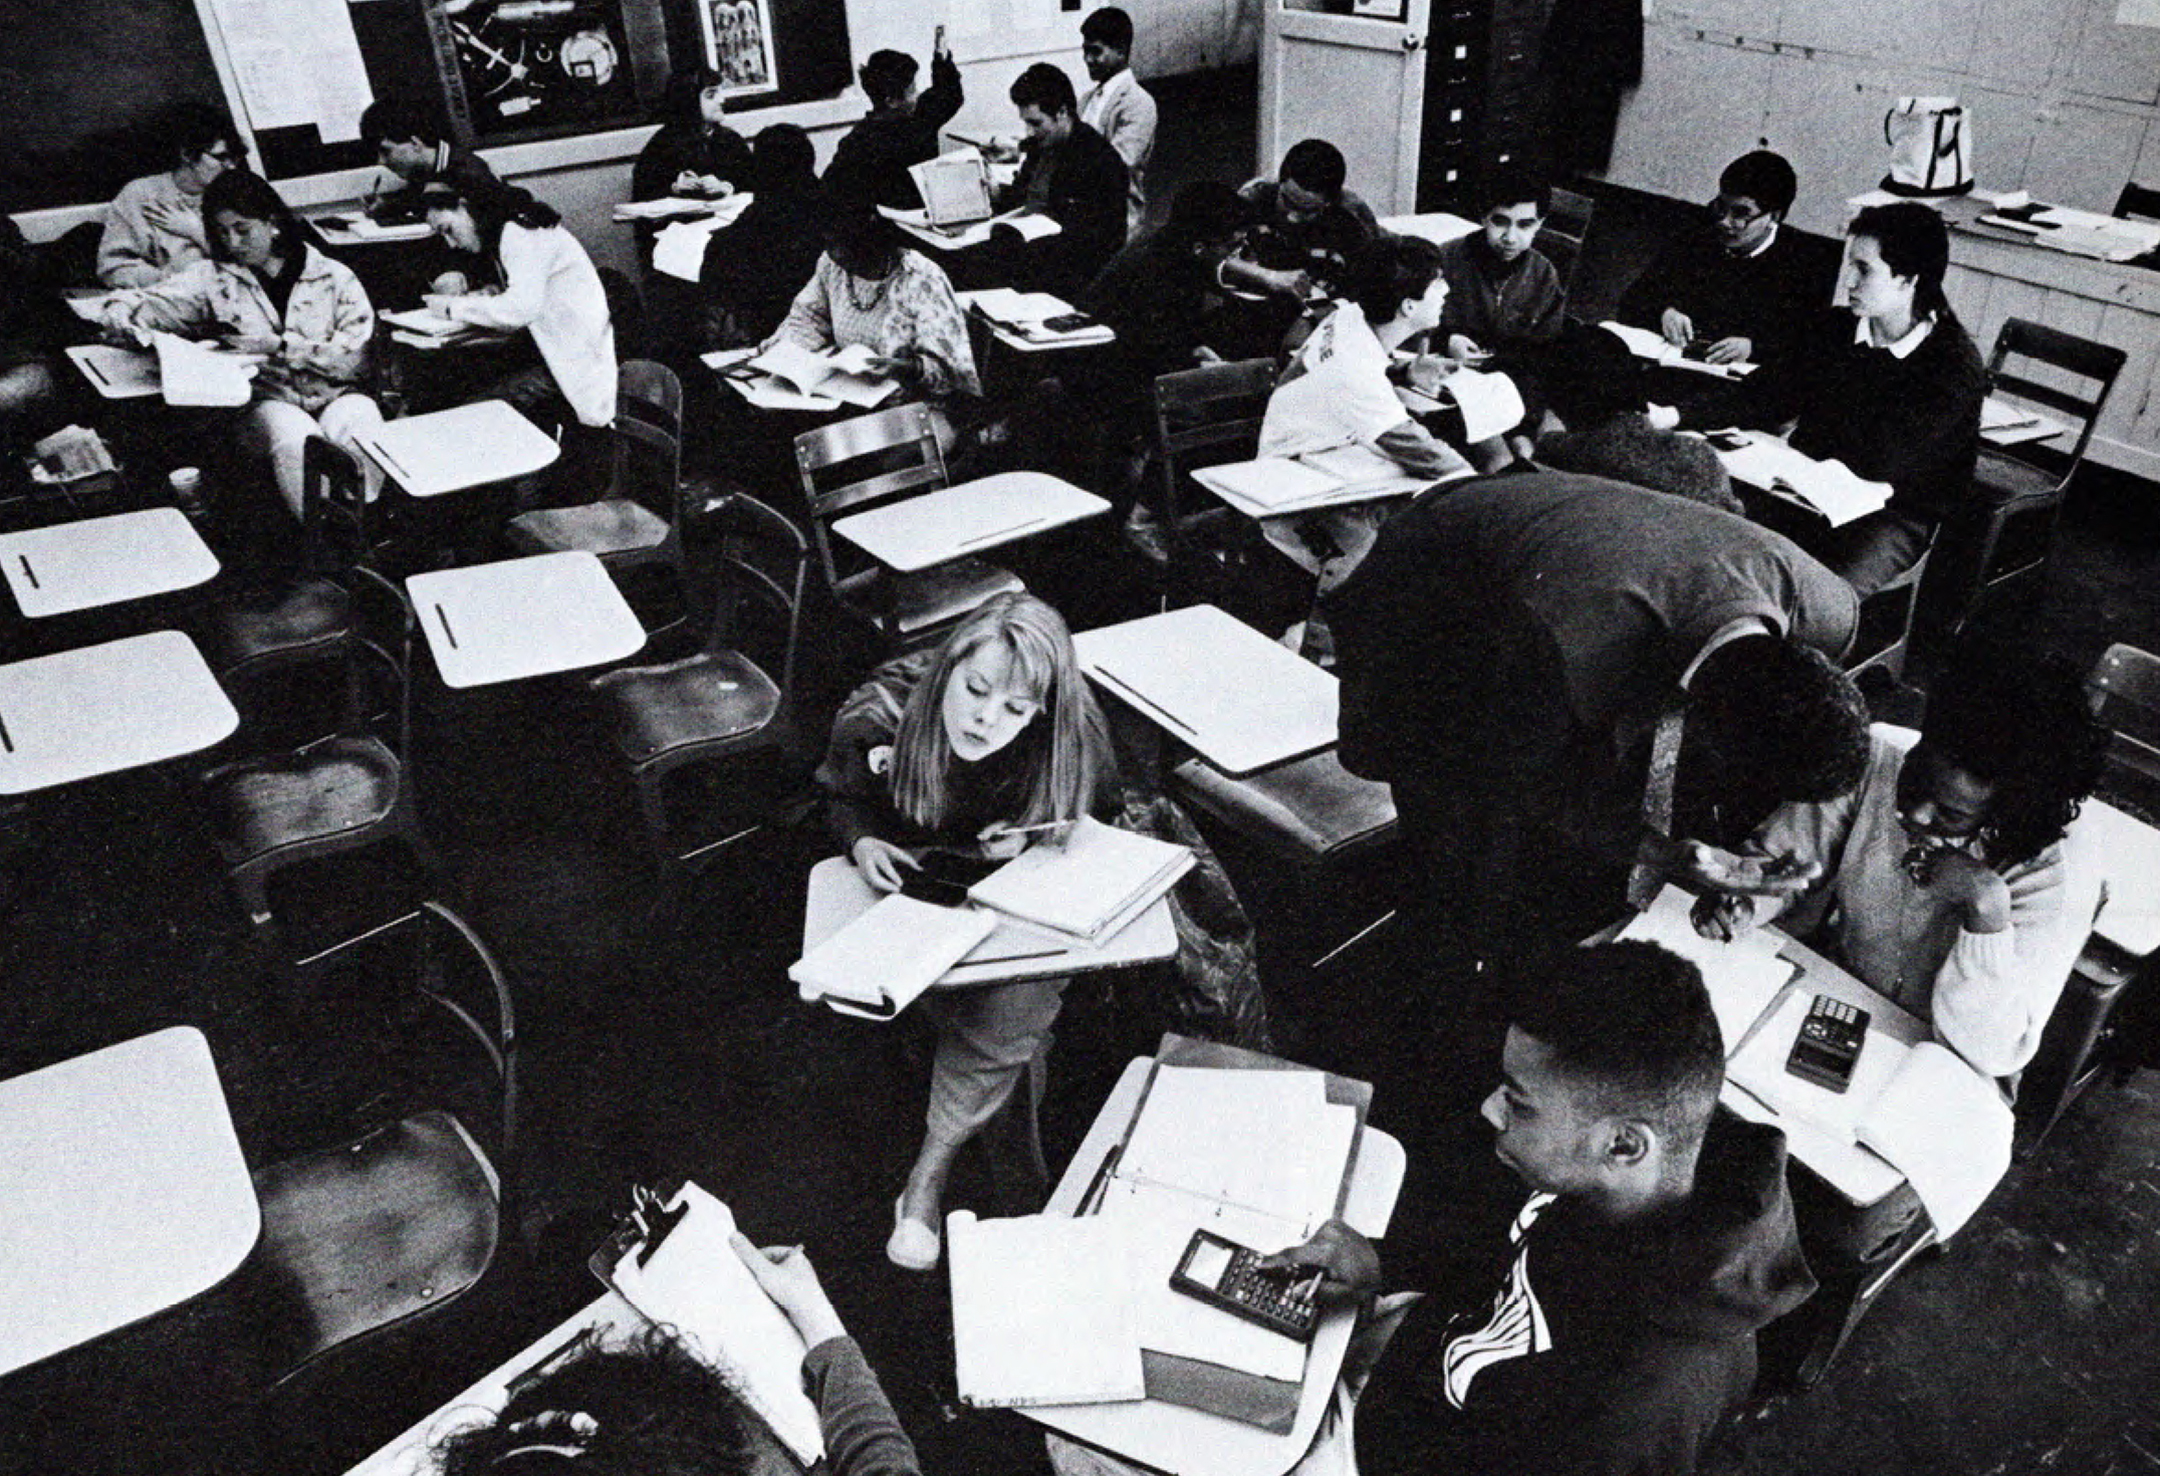 Black and white photo of a classroom where high school students do math work with calculators and notebooks while sitting at desks